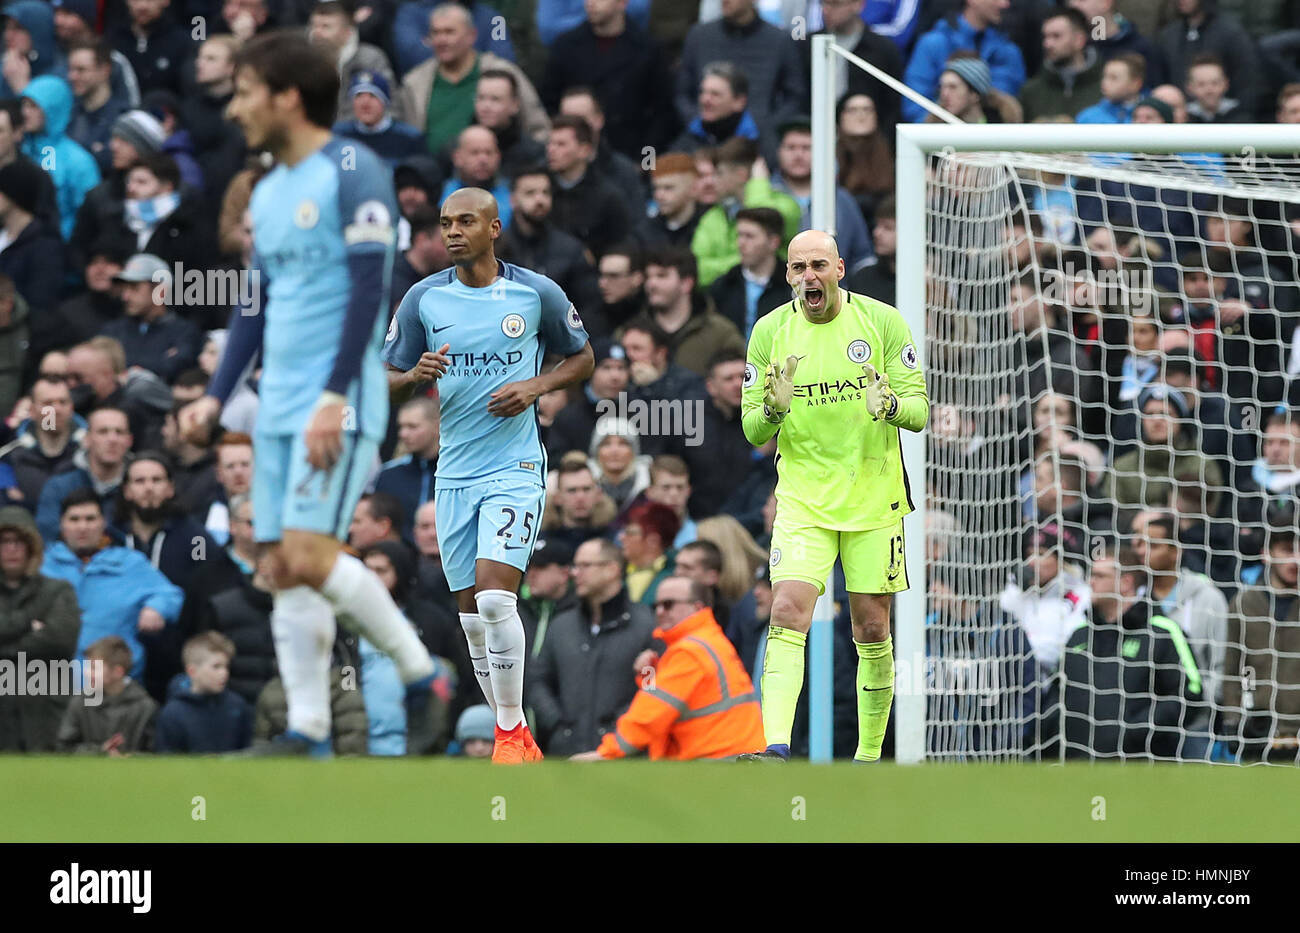 Manchester City goalkeeper Willy Caballero reacts after conceding a goal during the Premier League match at the Etihad Stadium, Manchester. Stock Photo